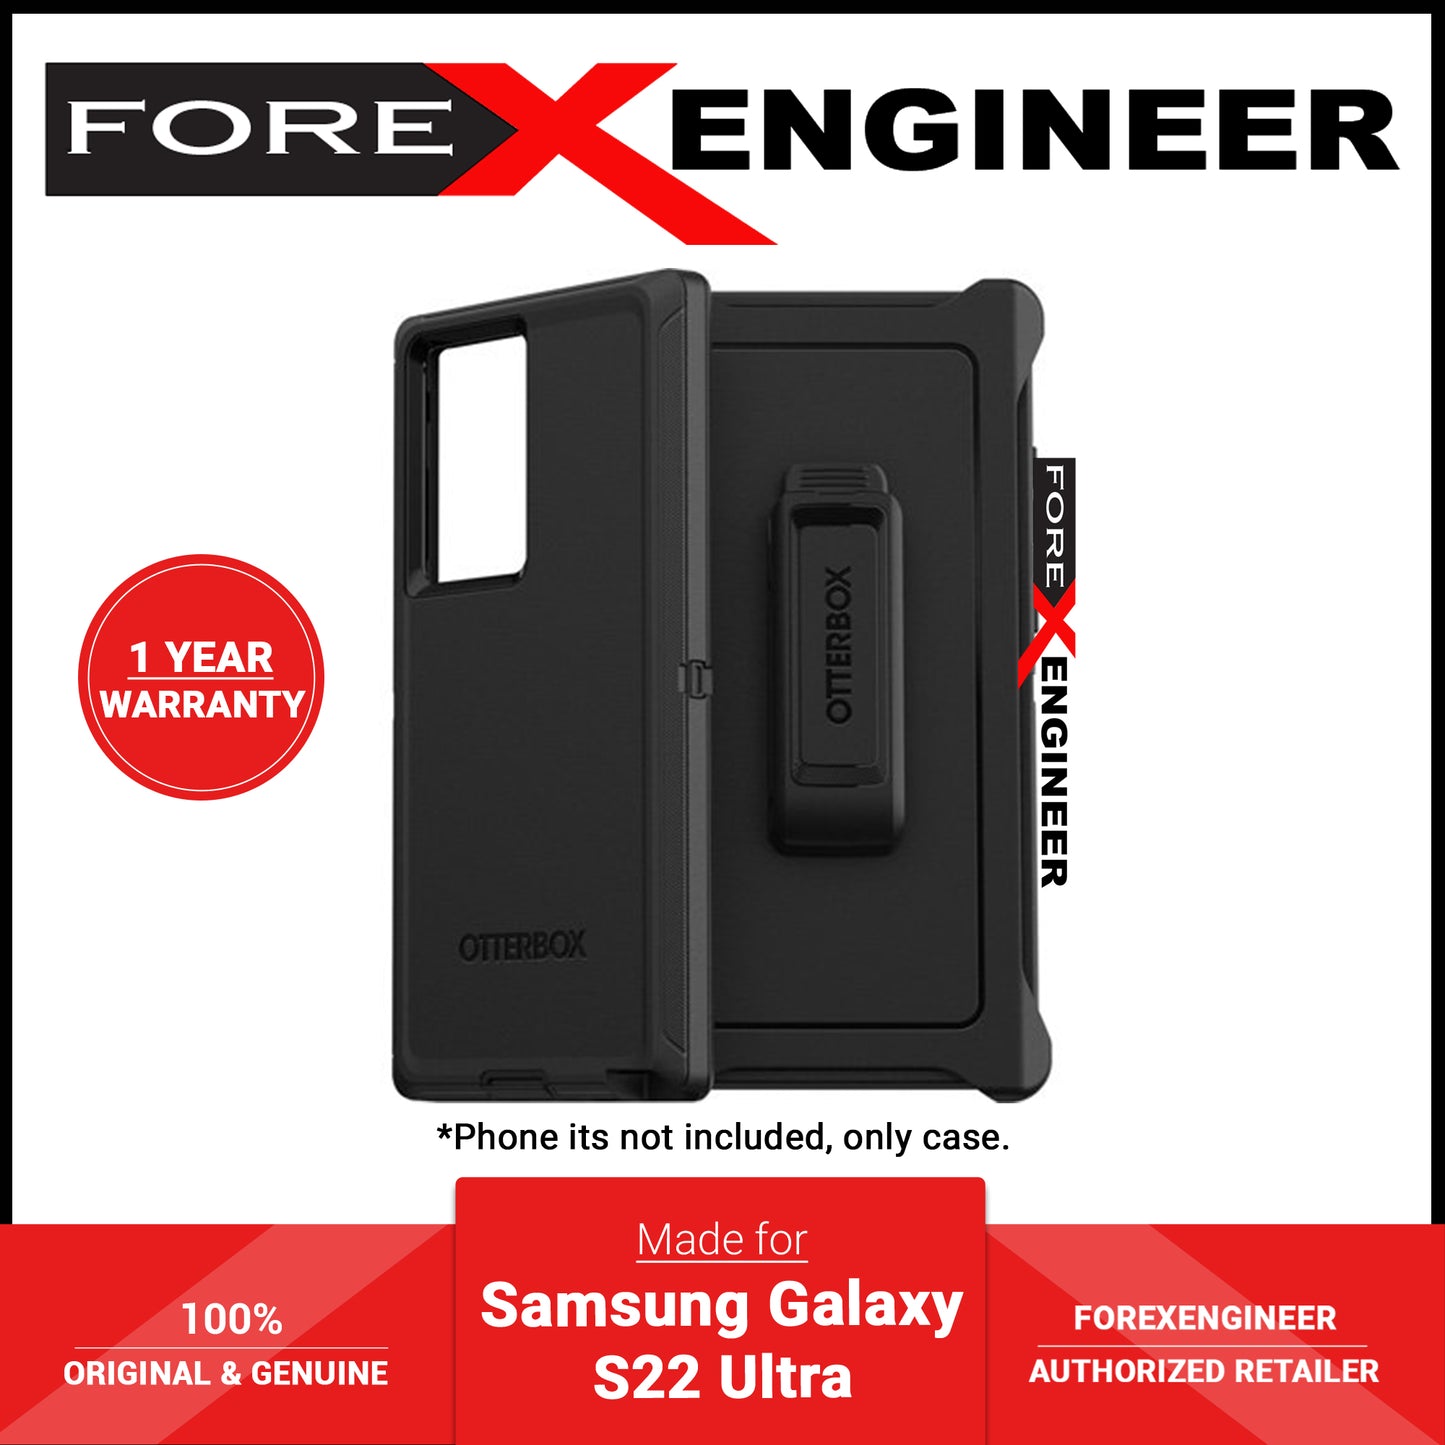 Otterbox Defender Series Case for Samsung Galaxy S22 Ultra - Black (Barcode: 840104295229 )